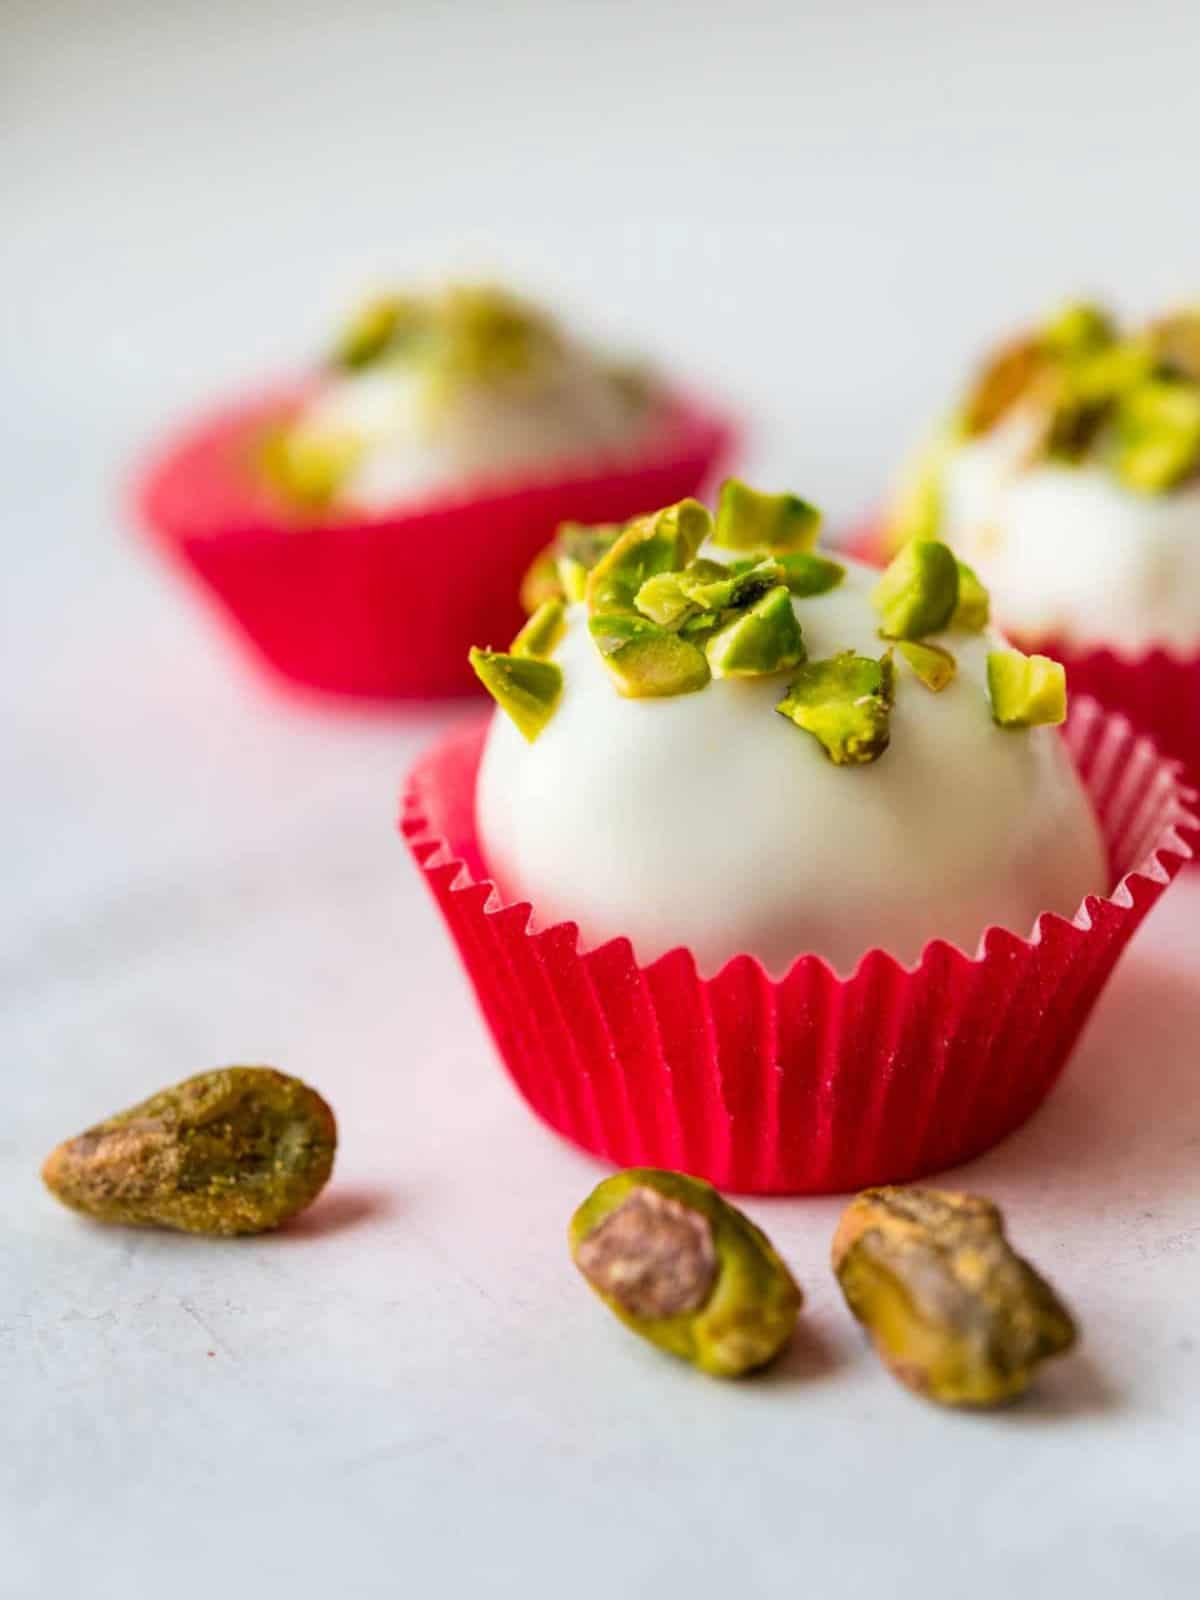 Rum-spiced Cream Cheese Cake coated in White Chocolate topped with Crushed Pistachios